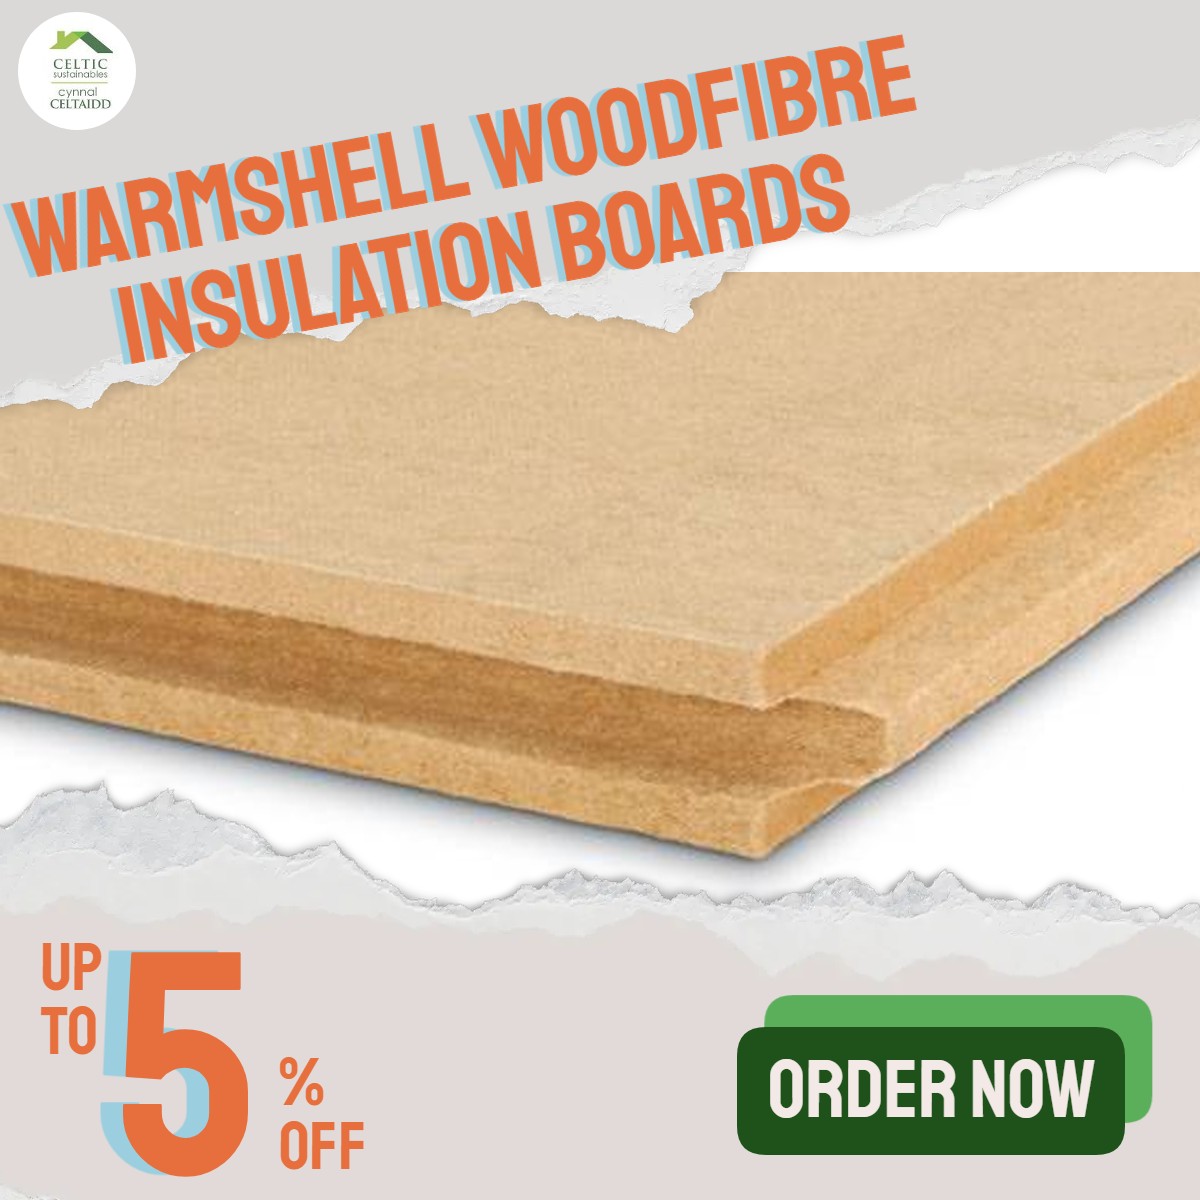 Lime Green - Warmshell Woodfibre Insulation Boards